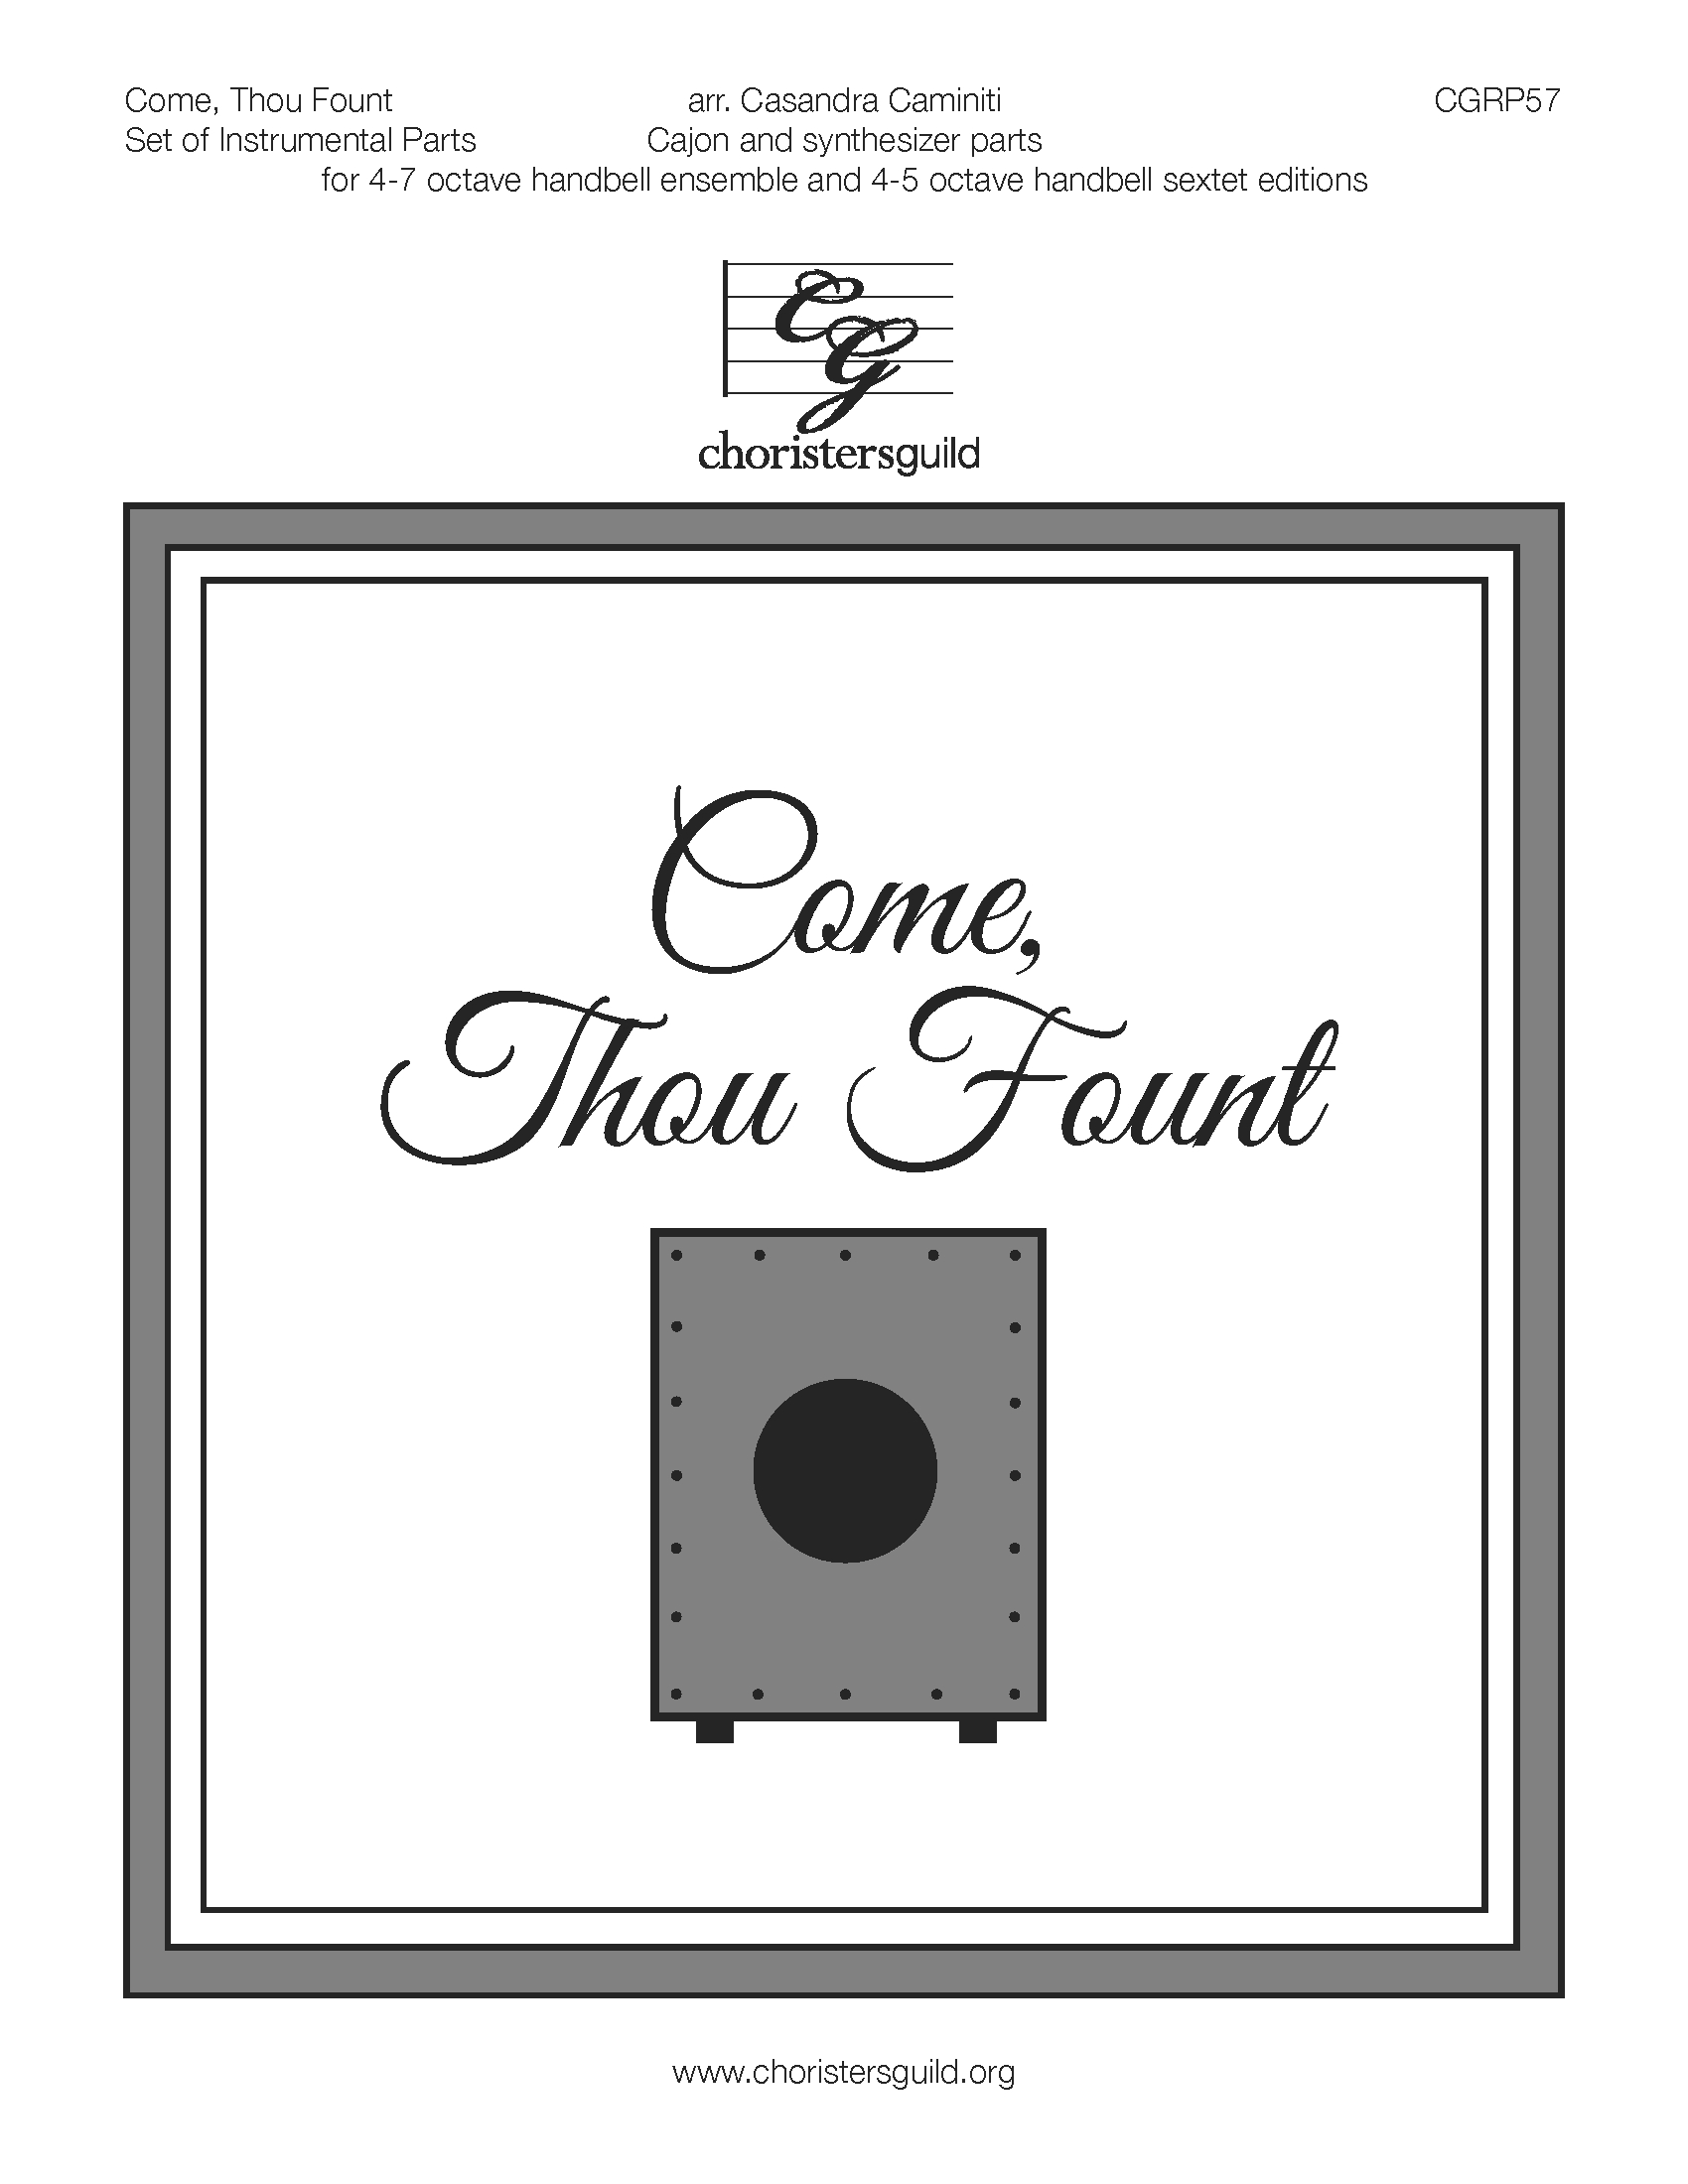 Come, thou Fount- Instrumental Parts